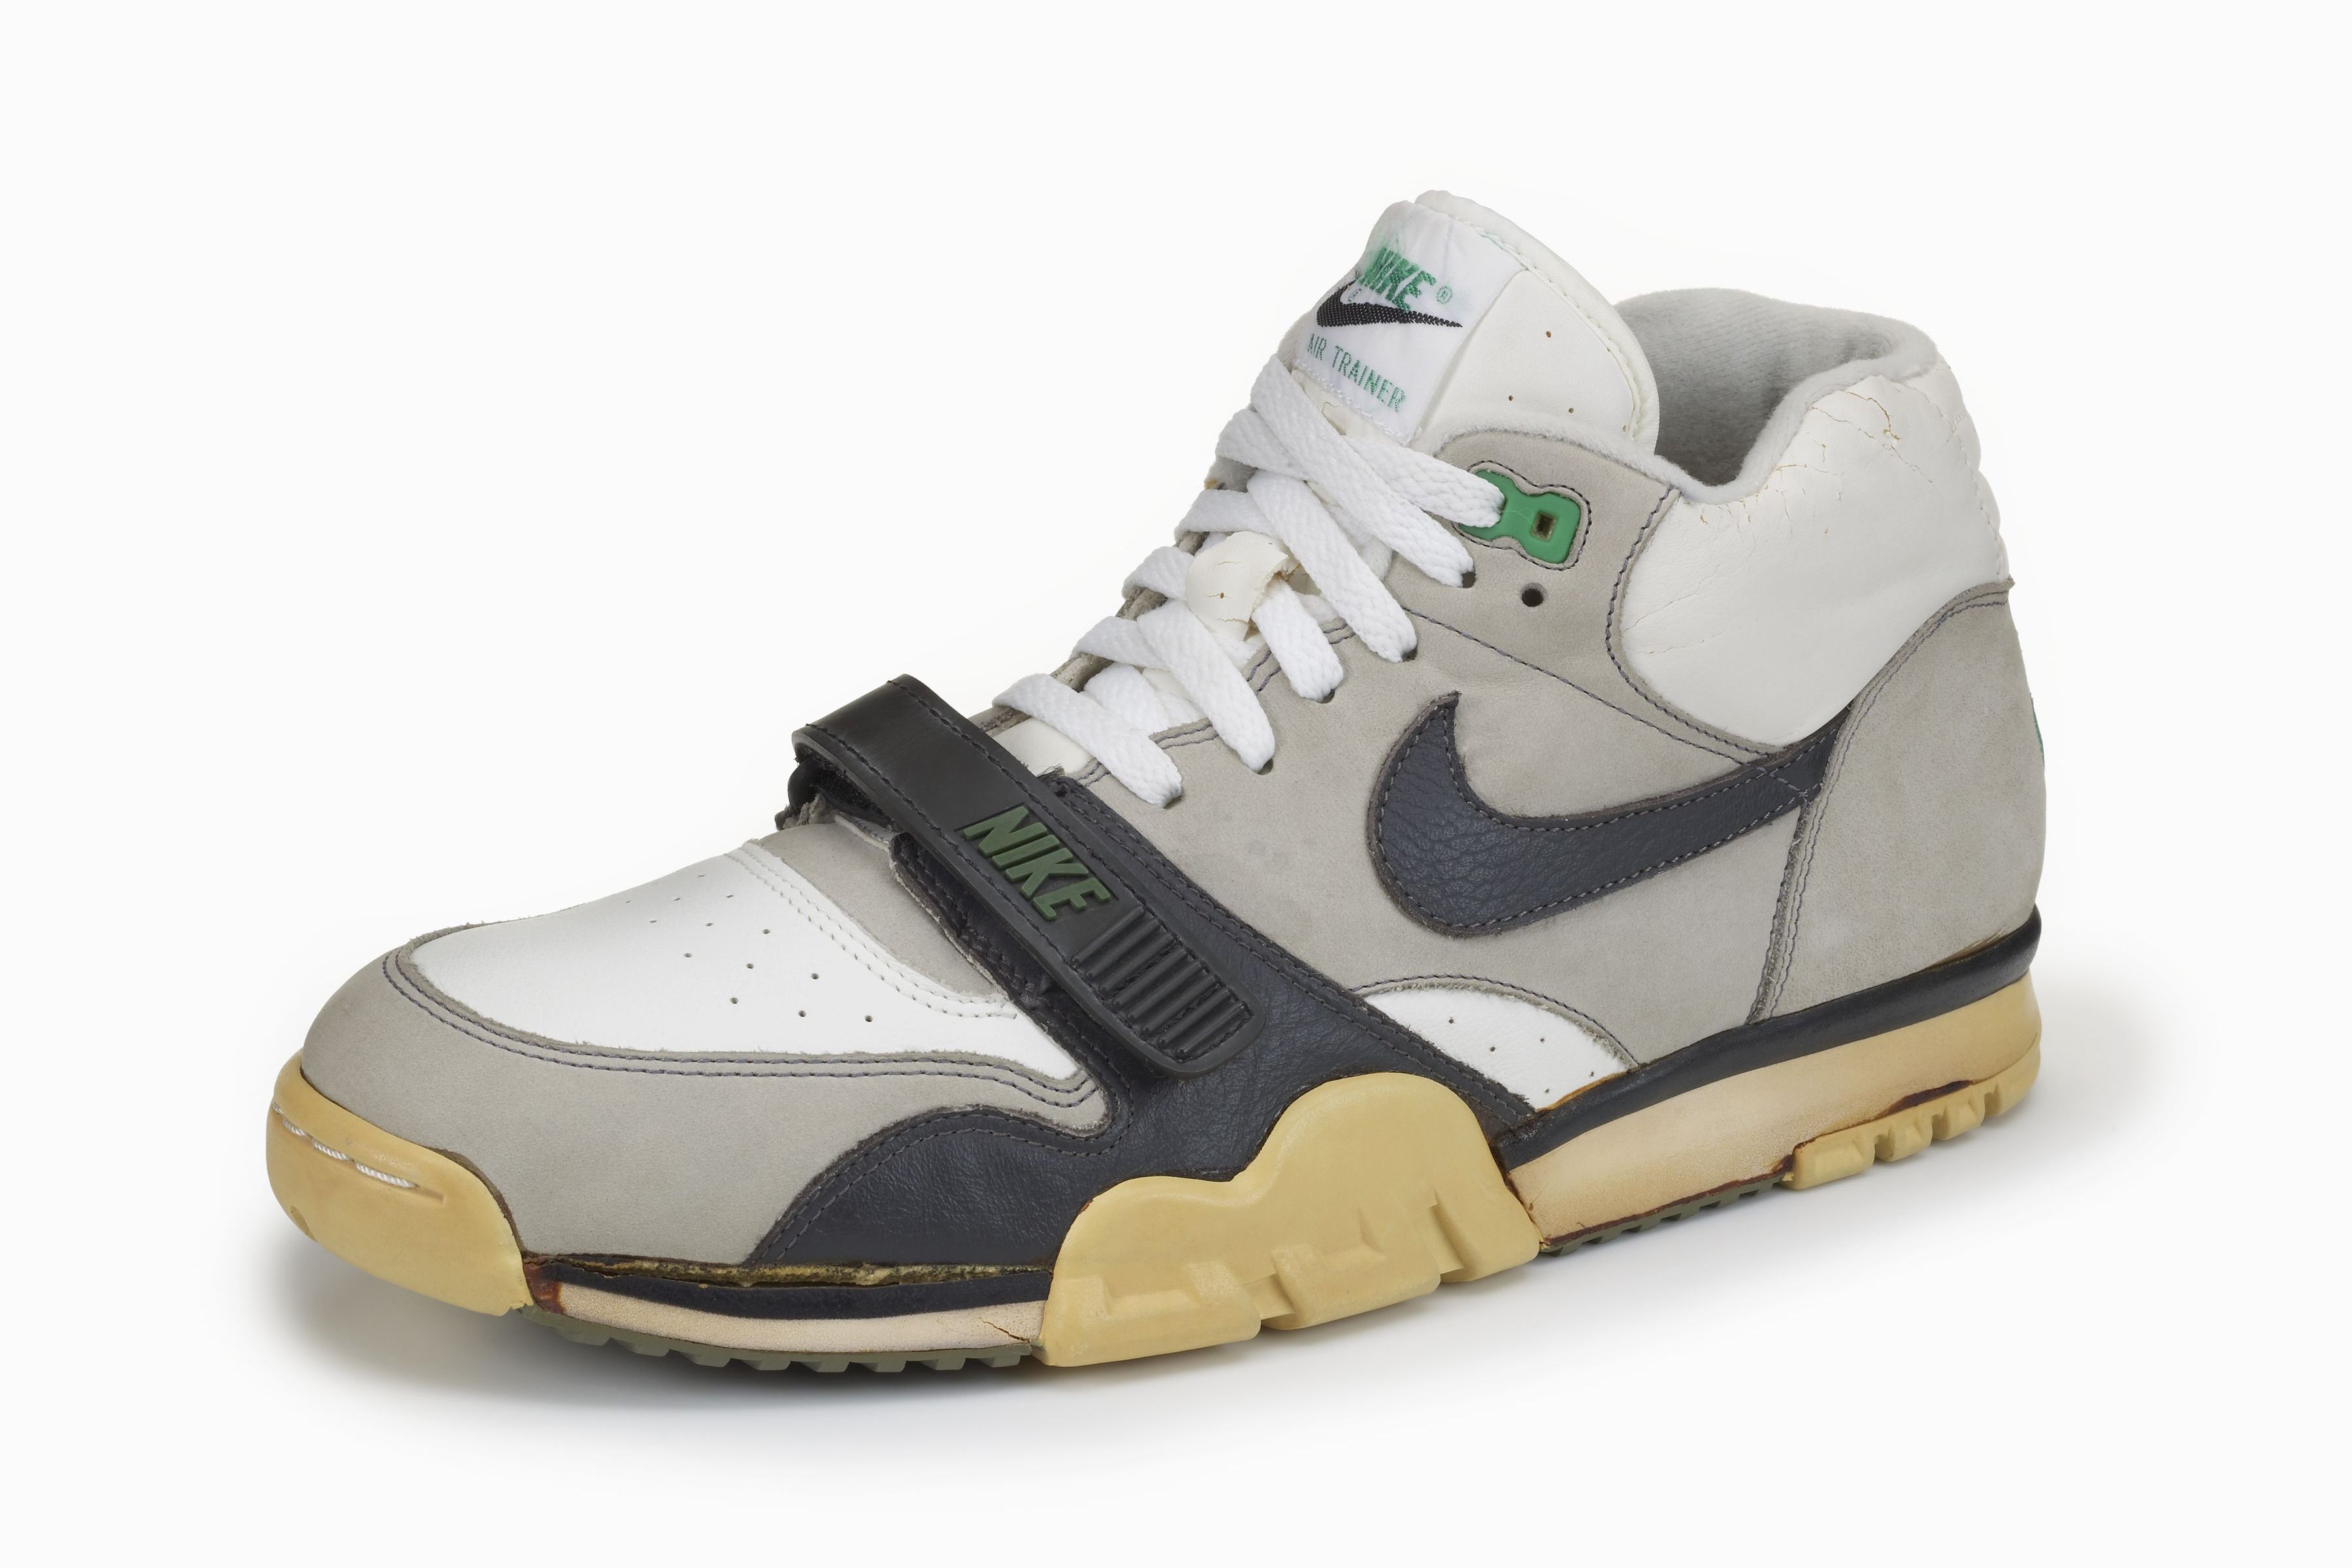 lápiz miel siguiente Five Facts You Need To Know About the Nike Air Trainer 1 - Sneaker Freaker